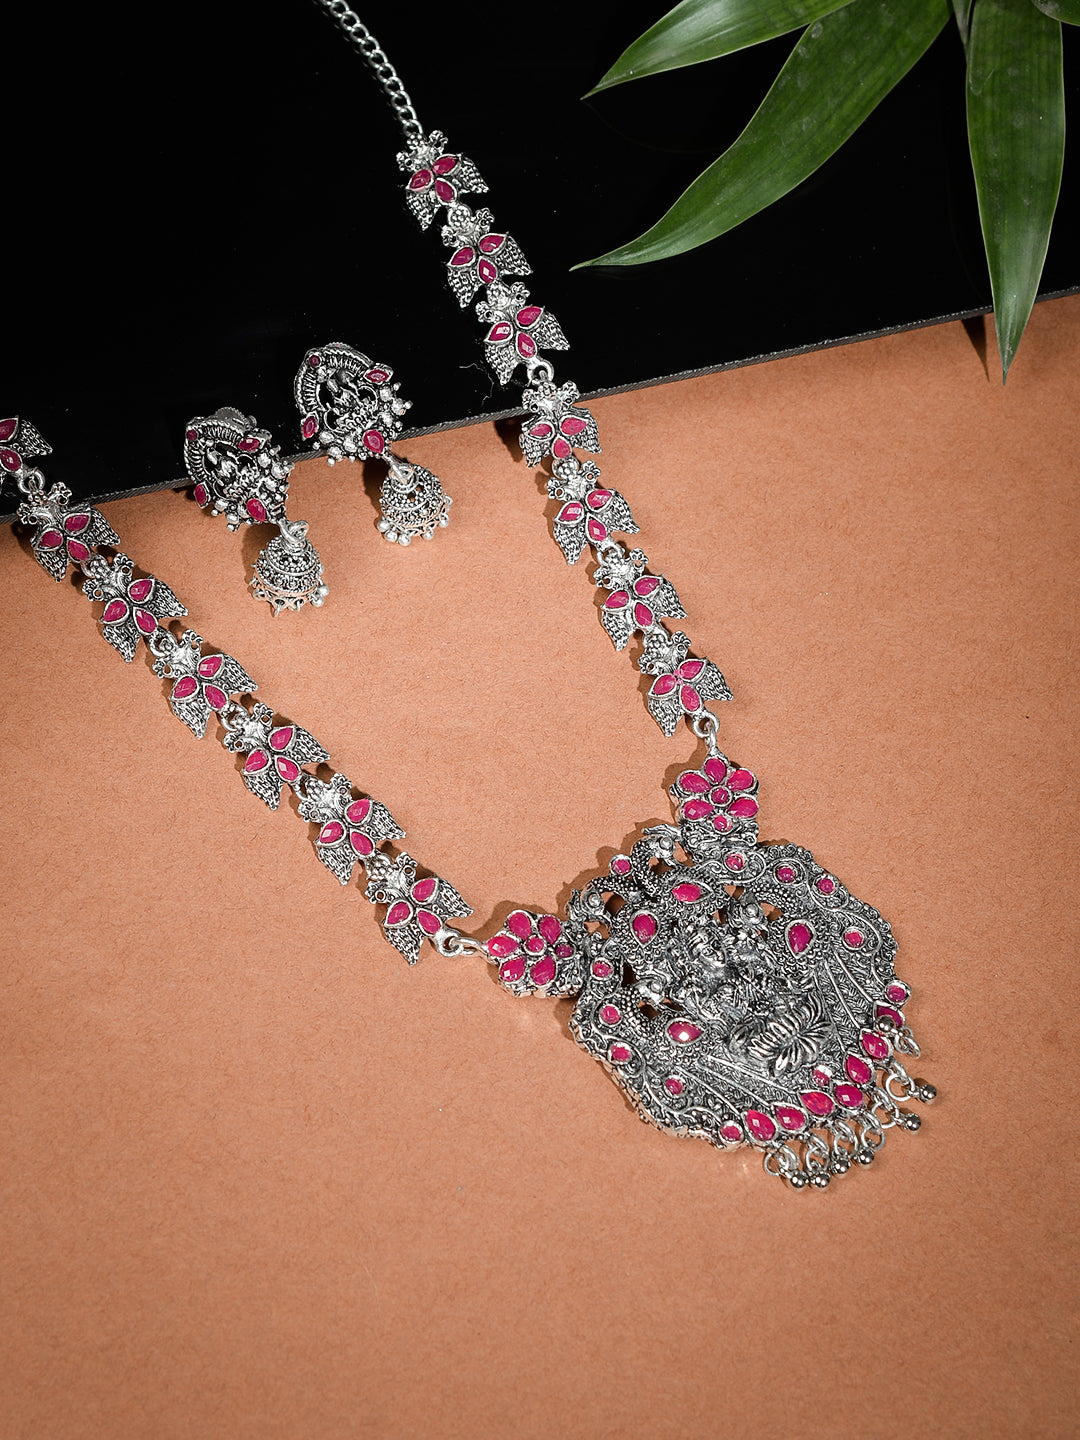 Pink Oxidized Silver Temple Jewelry Set For Women